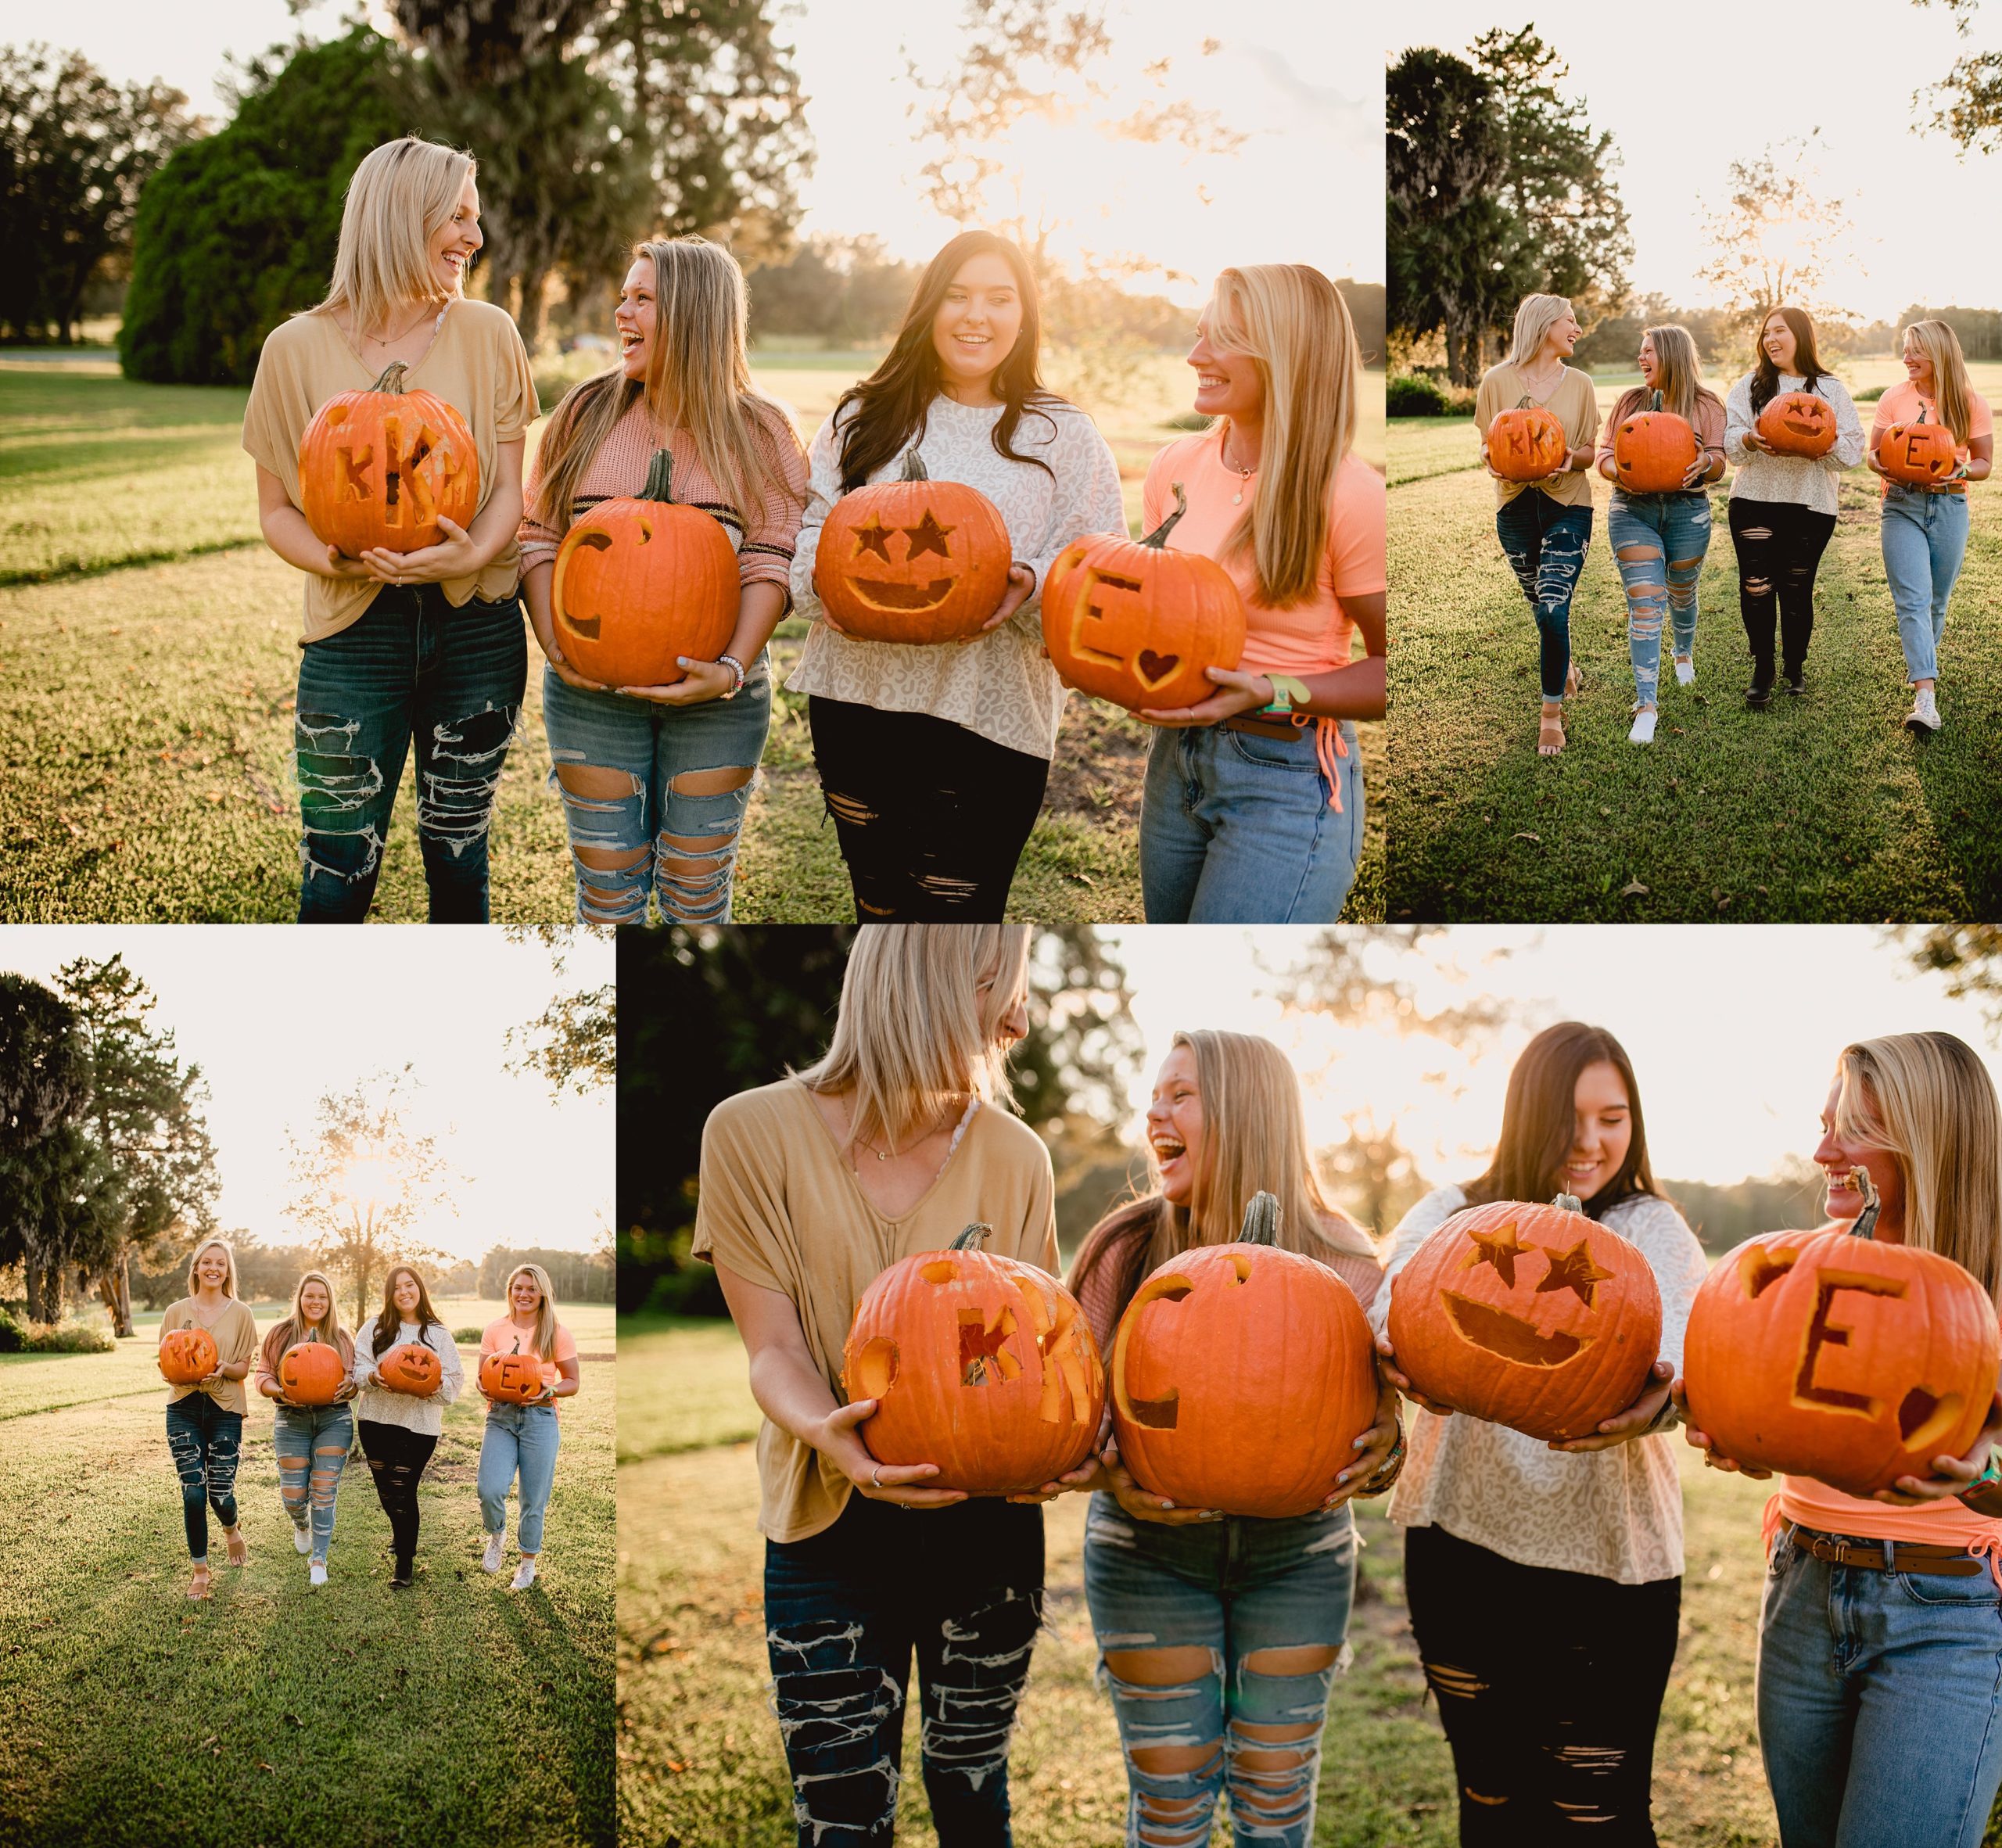 Seniors social during fall pumpkin carving with professional photographer